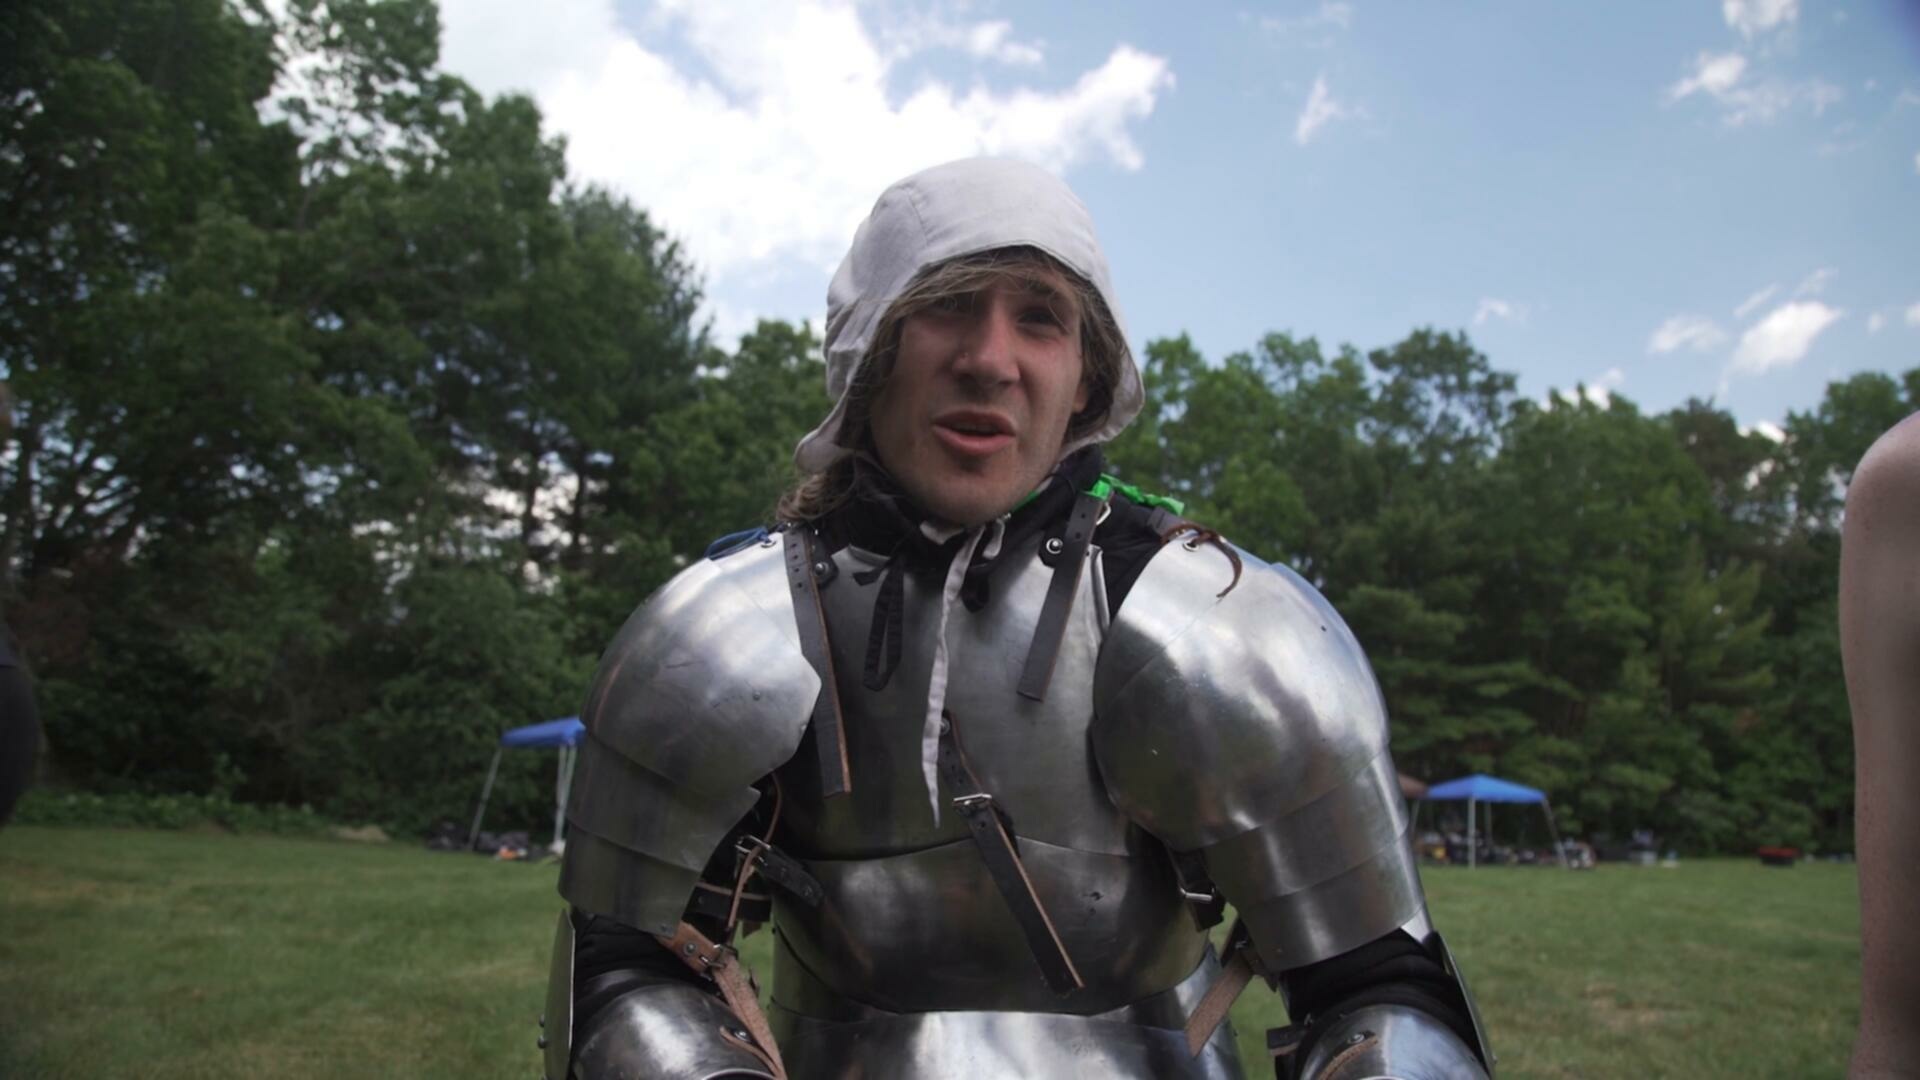 Off the Cuff S02E05 Fighting the Knights of New England Armored Combat League 1080p AMZN WEB DL DDP2